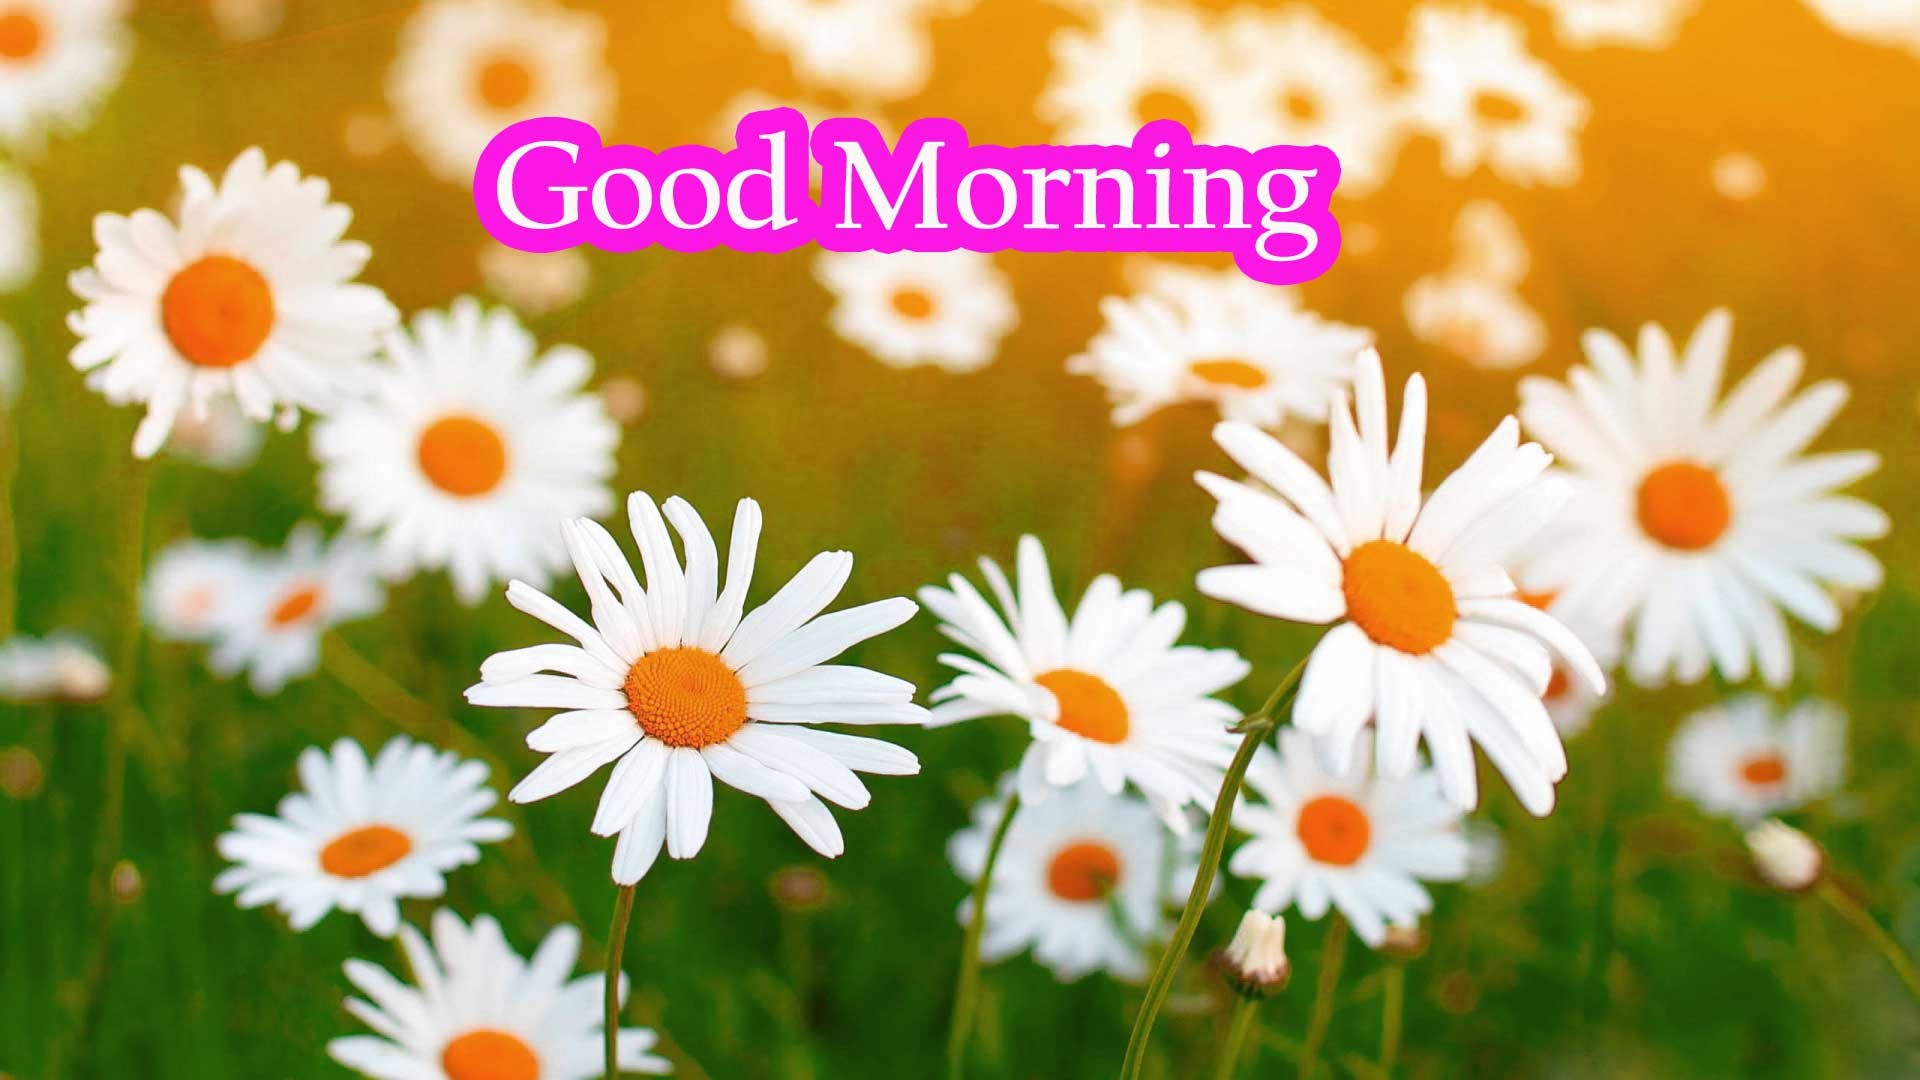 Good Morning Have A Nice Day Messages - Very Good Morning Have A Nice Day , HD Wallpaper & Backgrounds